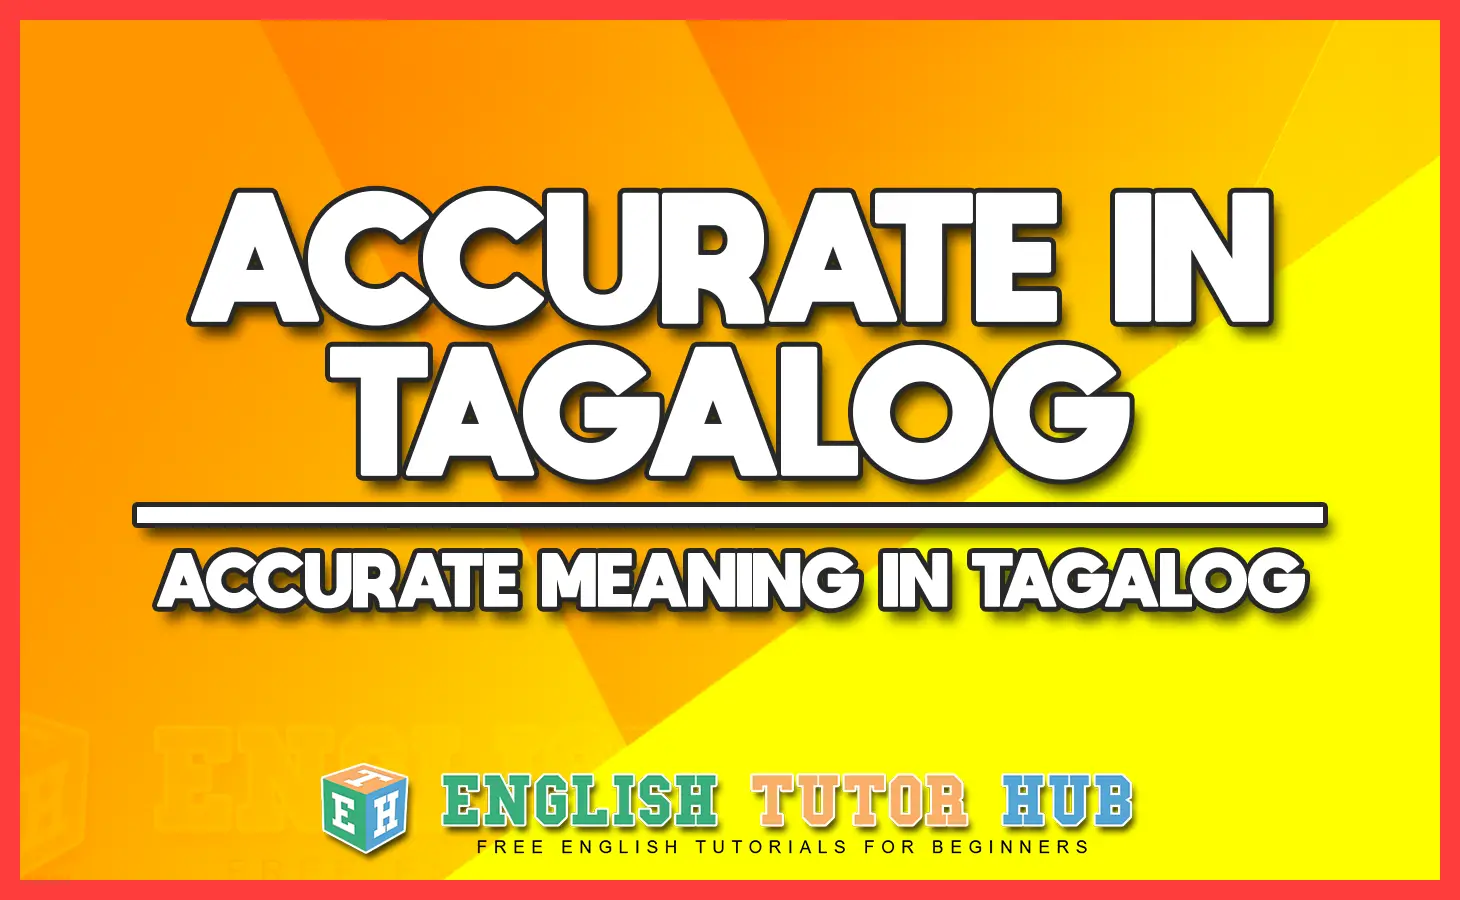 ACCURATE IN TAGALOG - ACCURATE MEANING IN TAGALOG